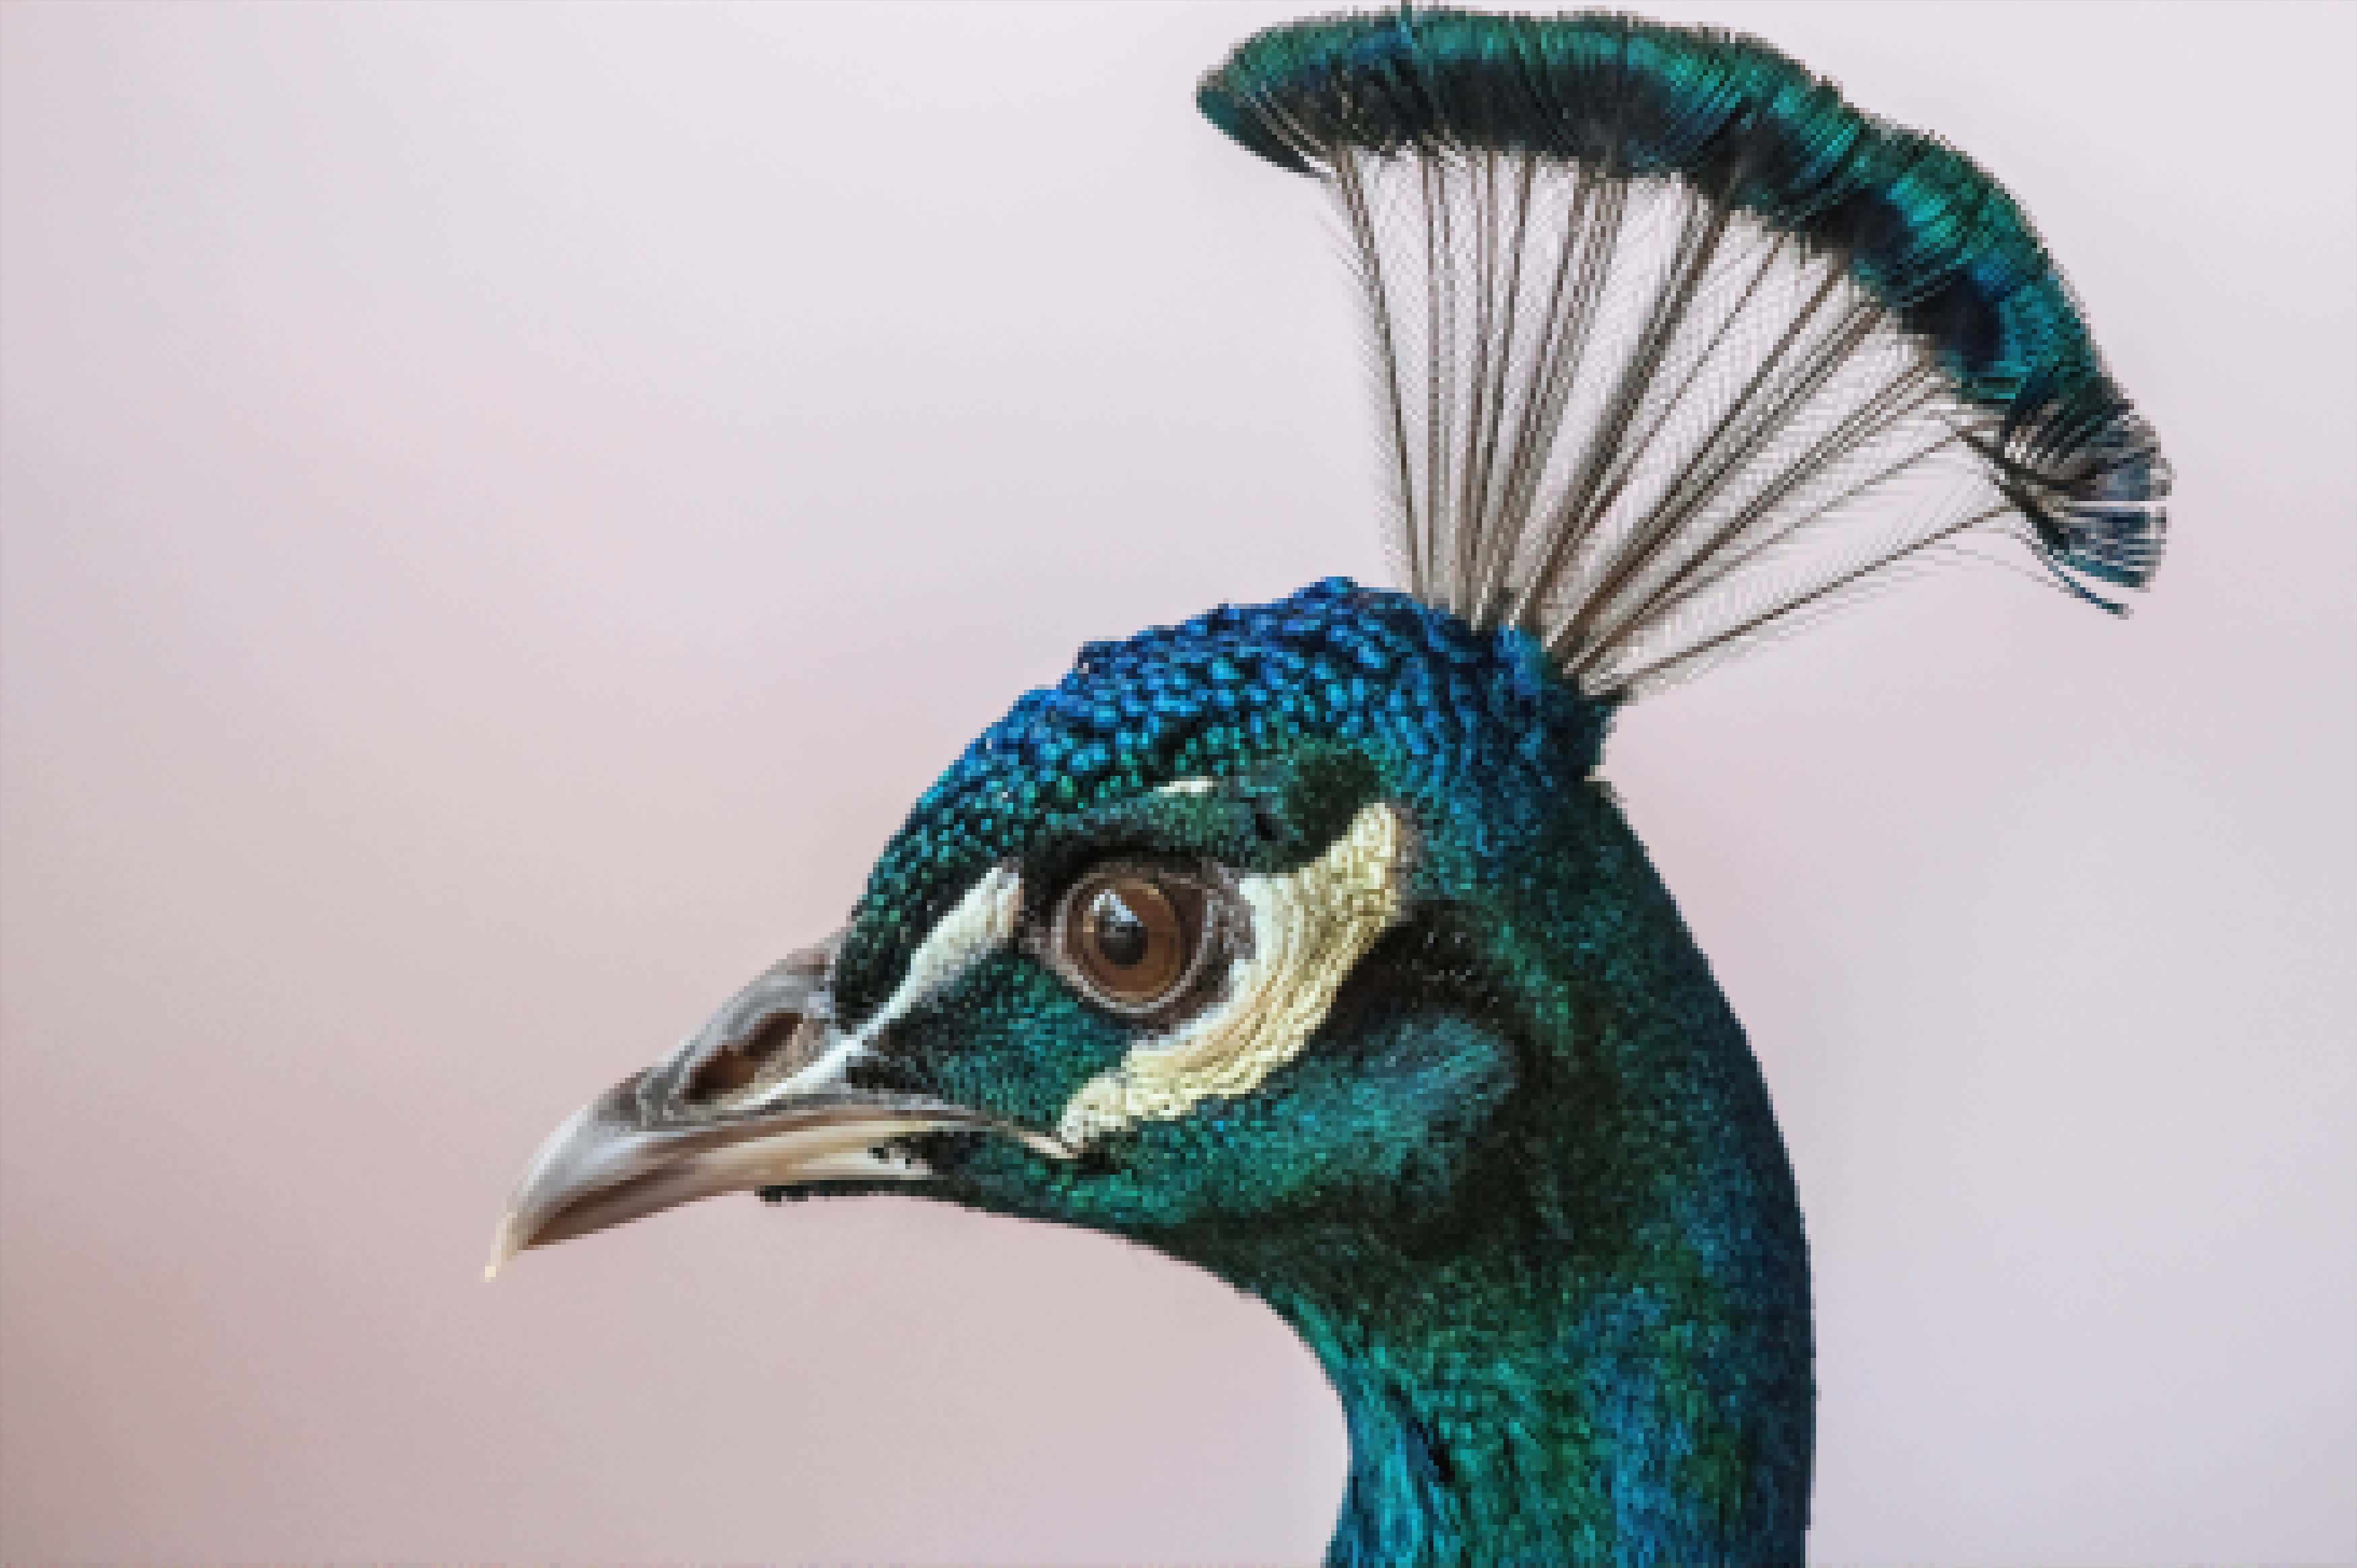 Low-resolution peacock